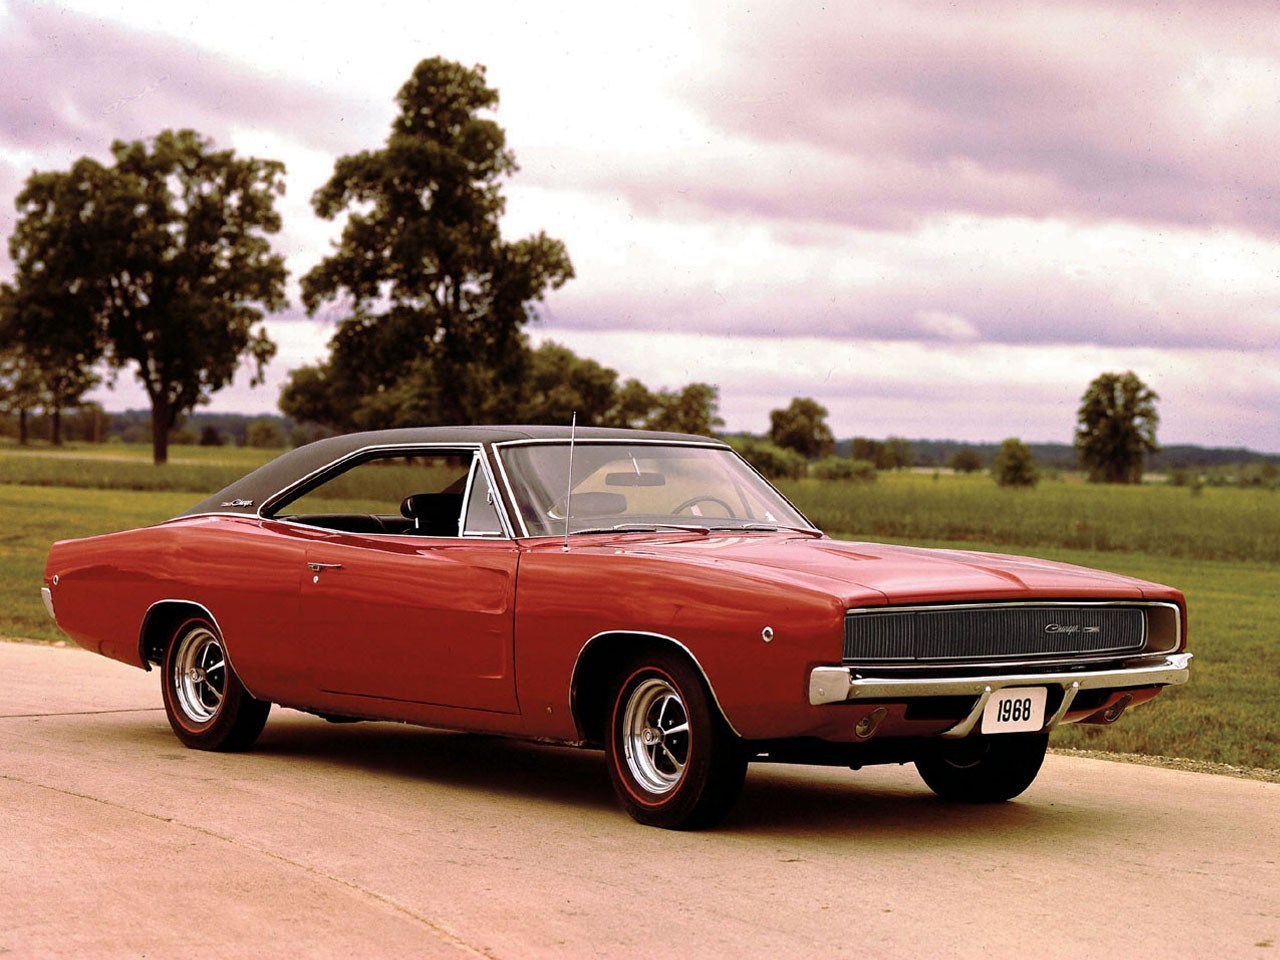 Mopar Wallpaper Dodge Charger Photo 1968 - Dodge Charger Rt Tuning , HD Wallpaper & Backgrounds